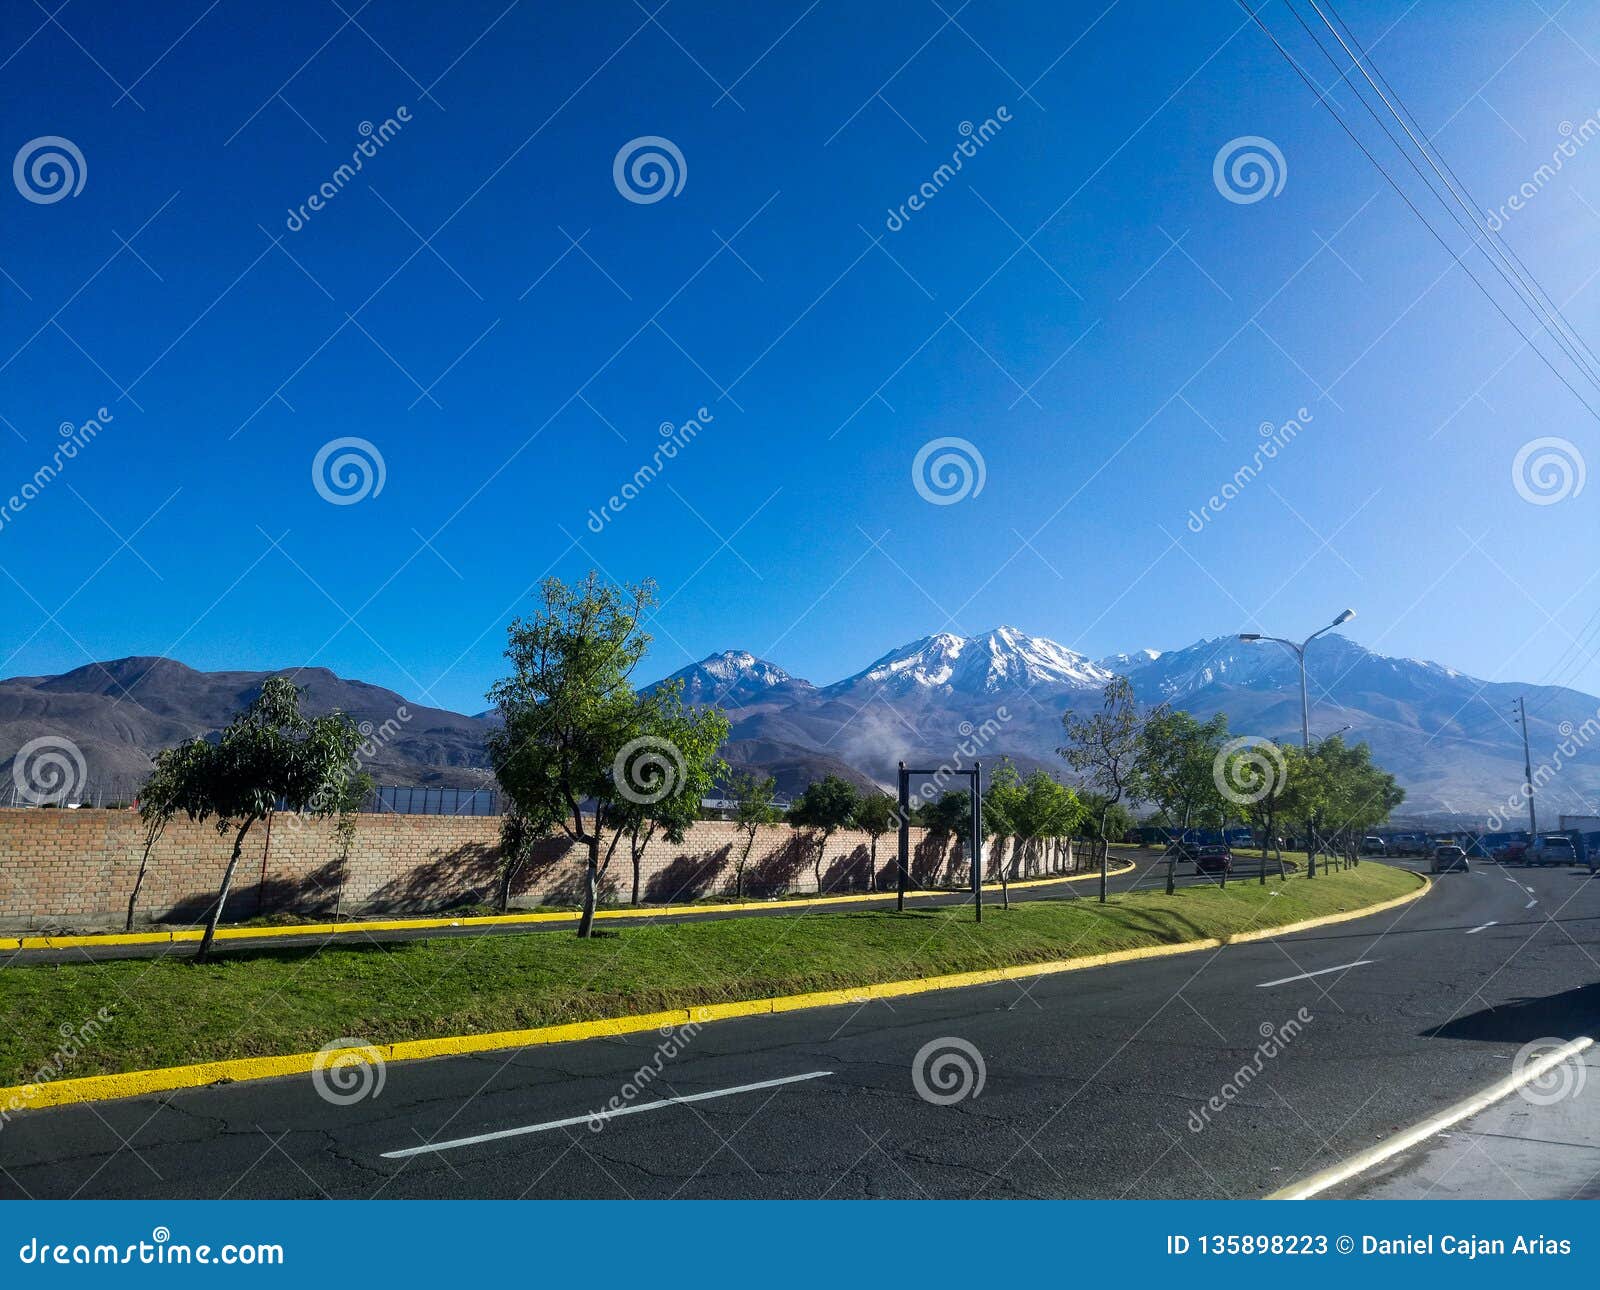 arequipa airport route